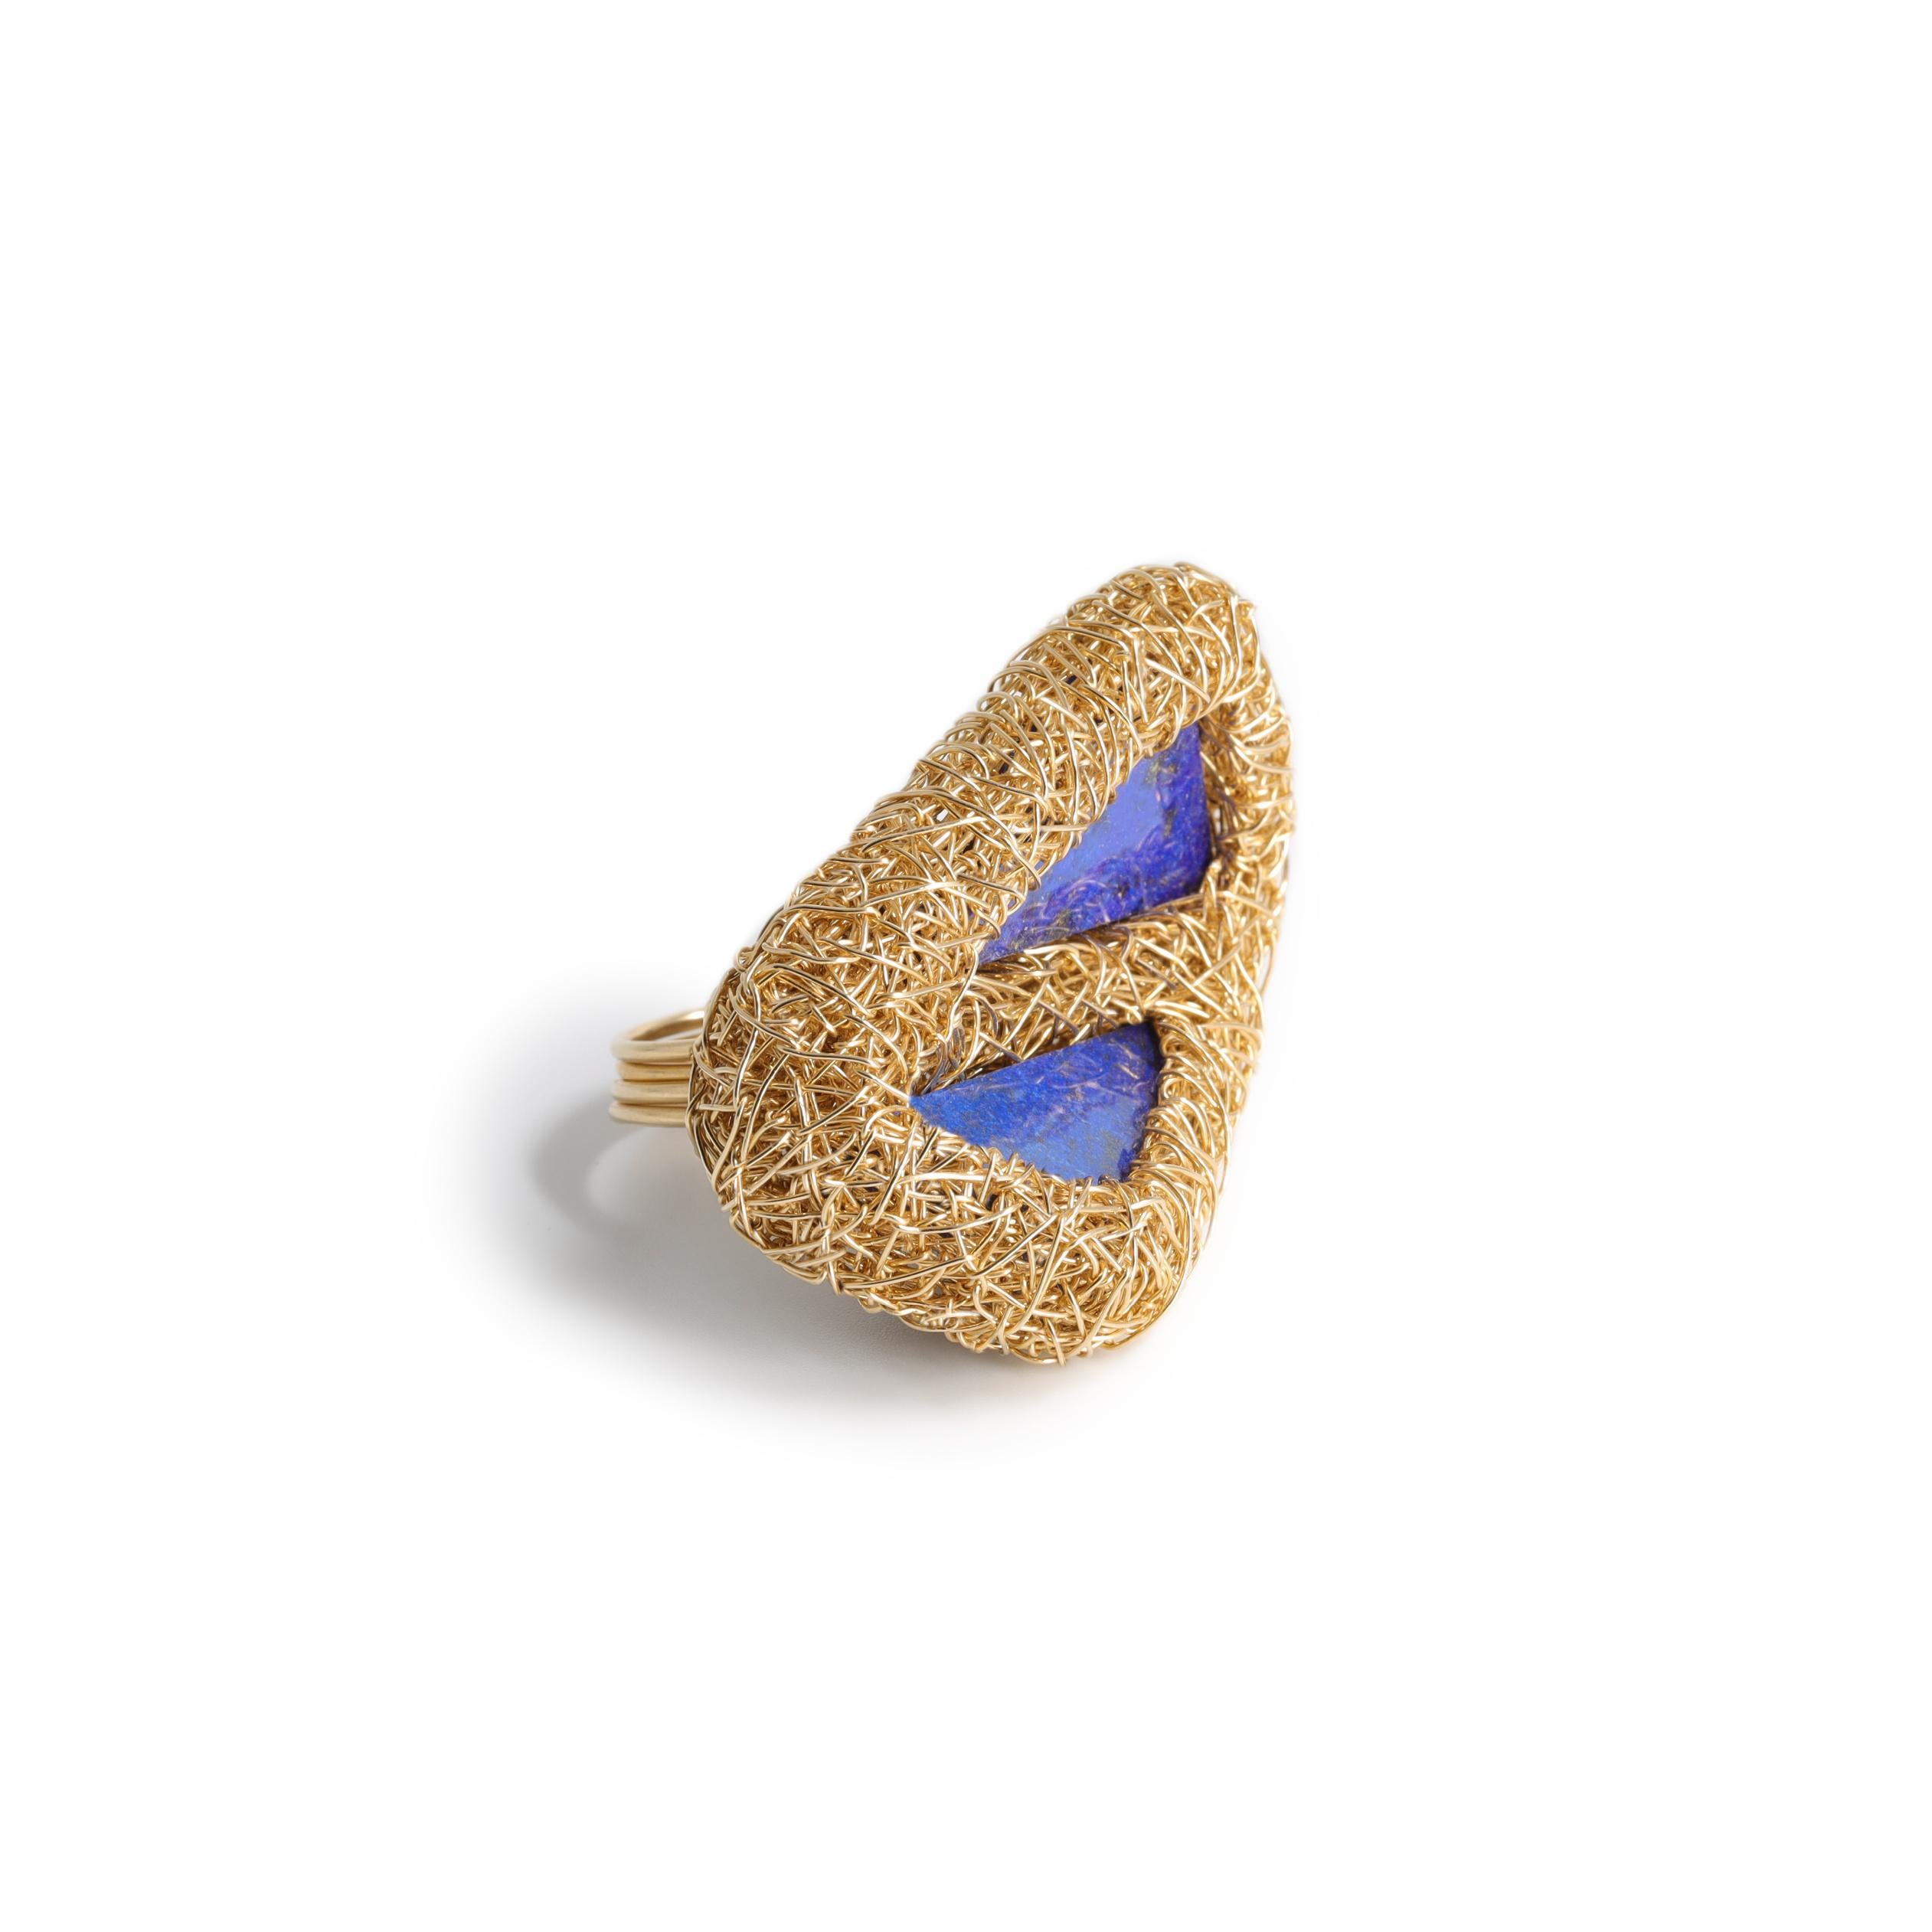 Lapis Lazuli 14 Kt Yellow Gold F. Cocktail Stone Statement Ring by the Artist 8